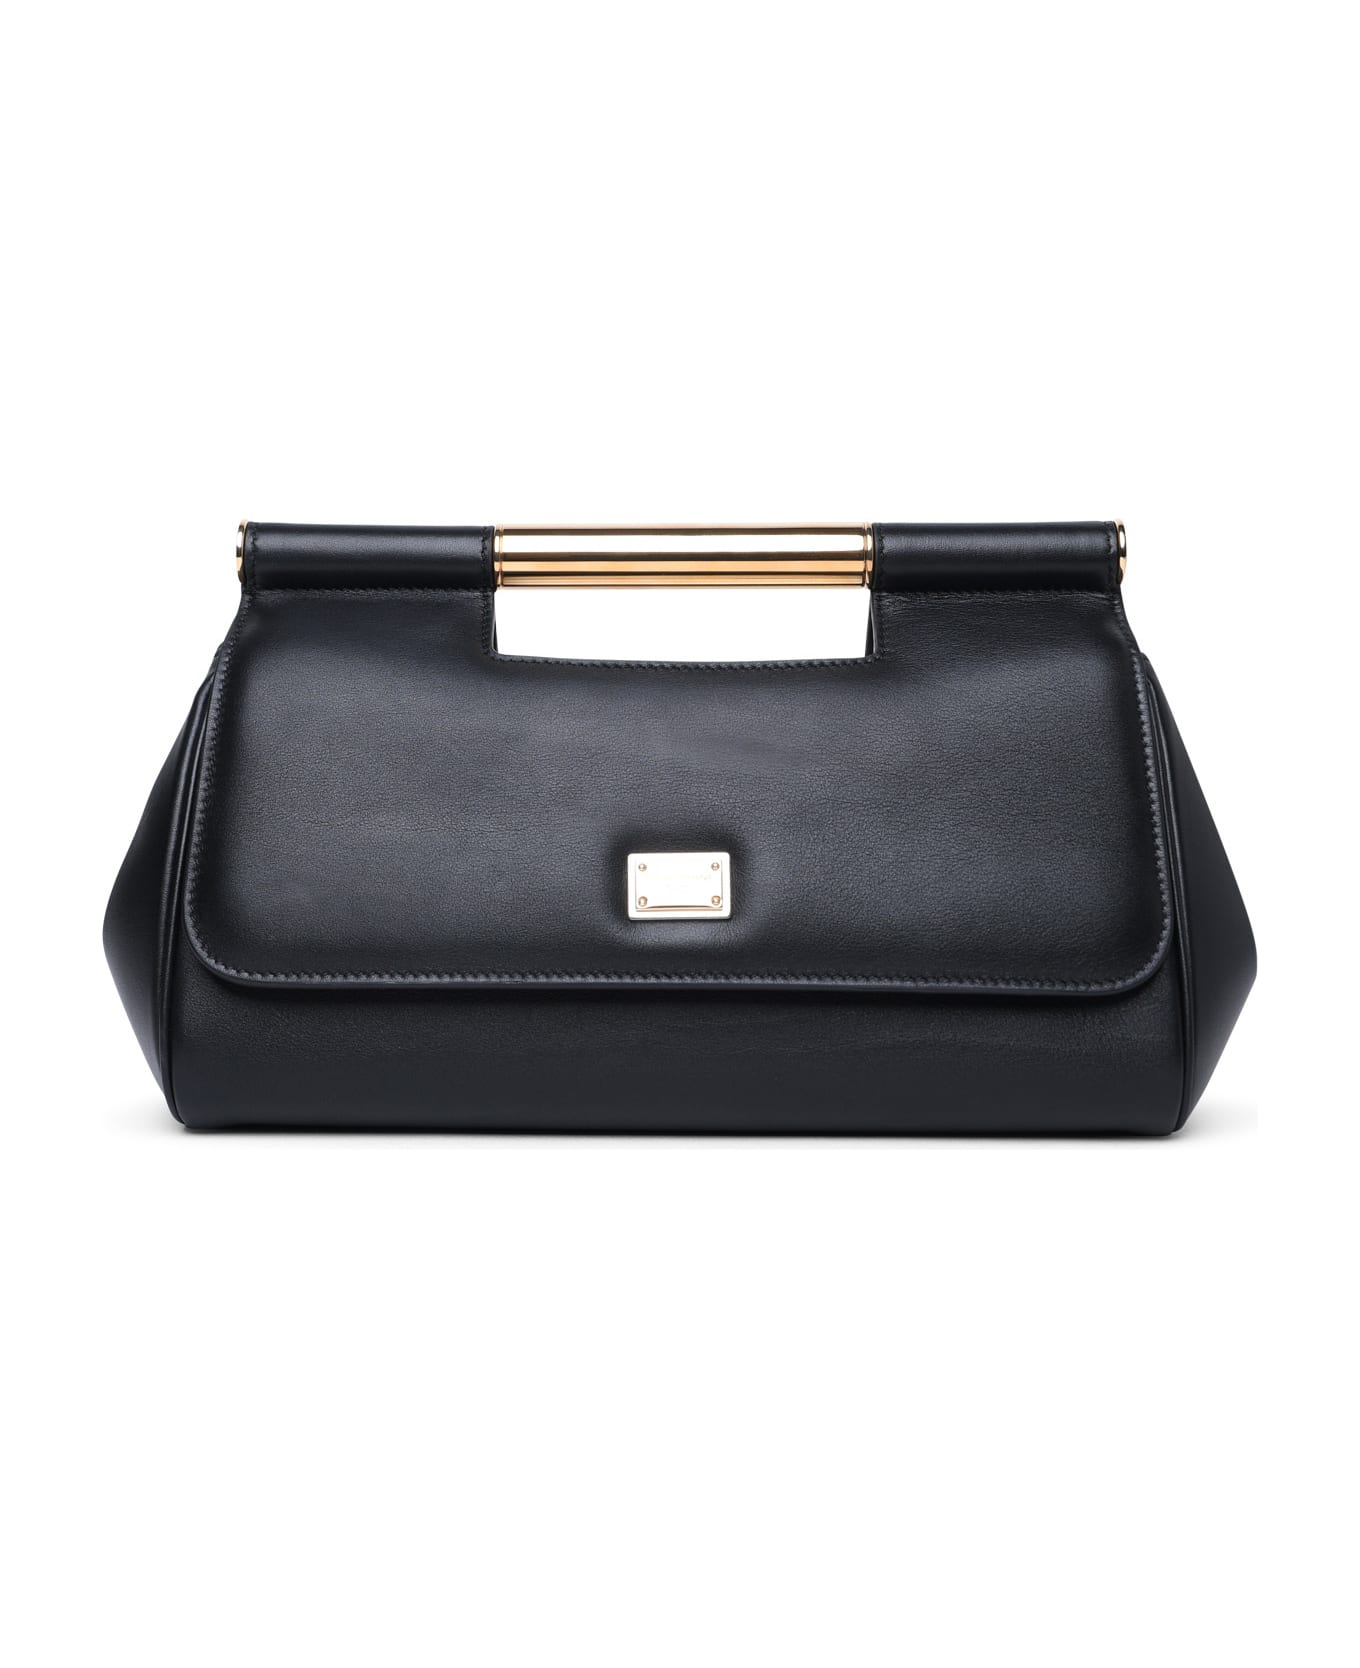 Dolce & Gabbana Sicily Leather Clutch - Black クラッチバッグ